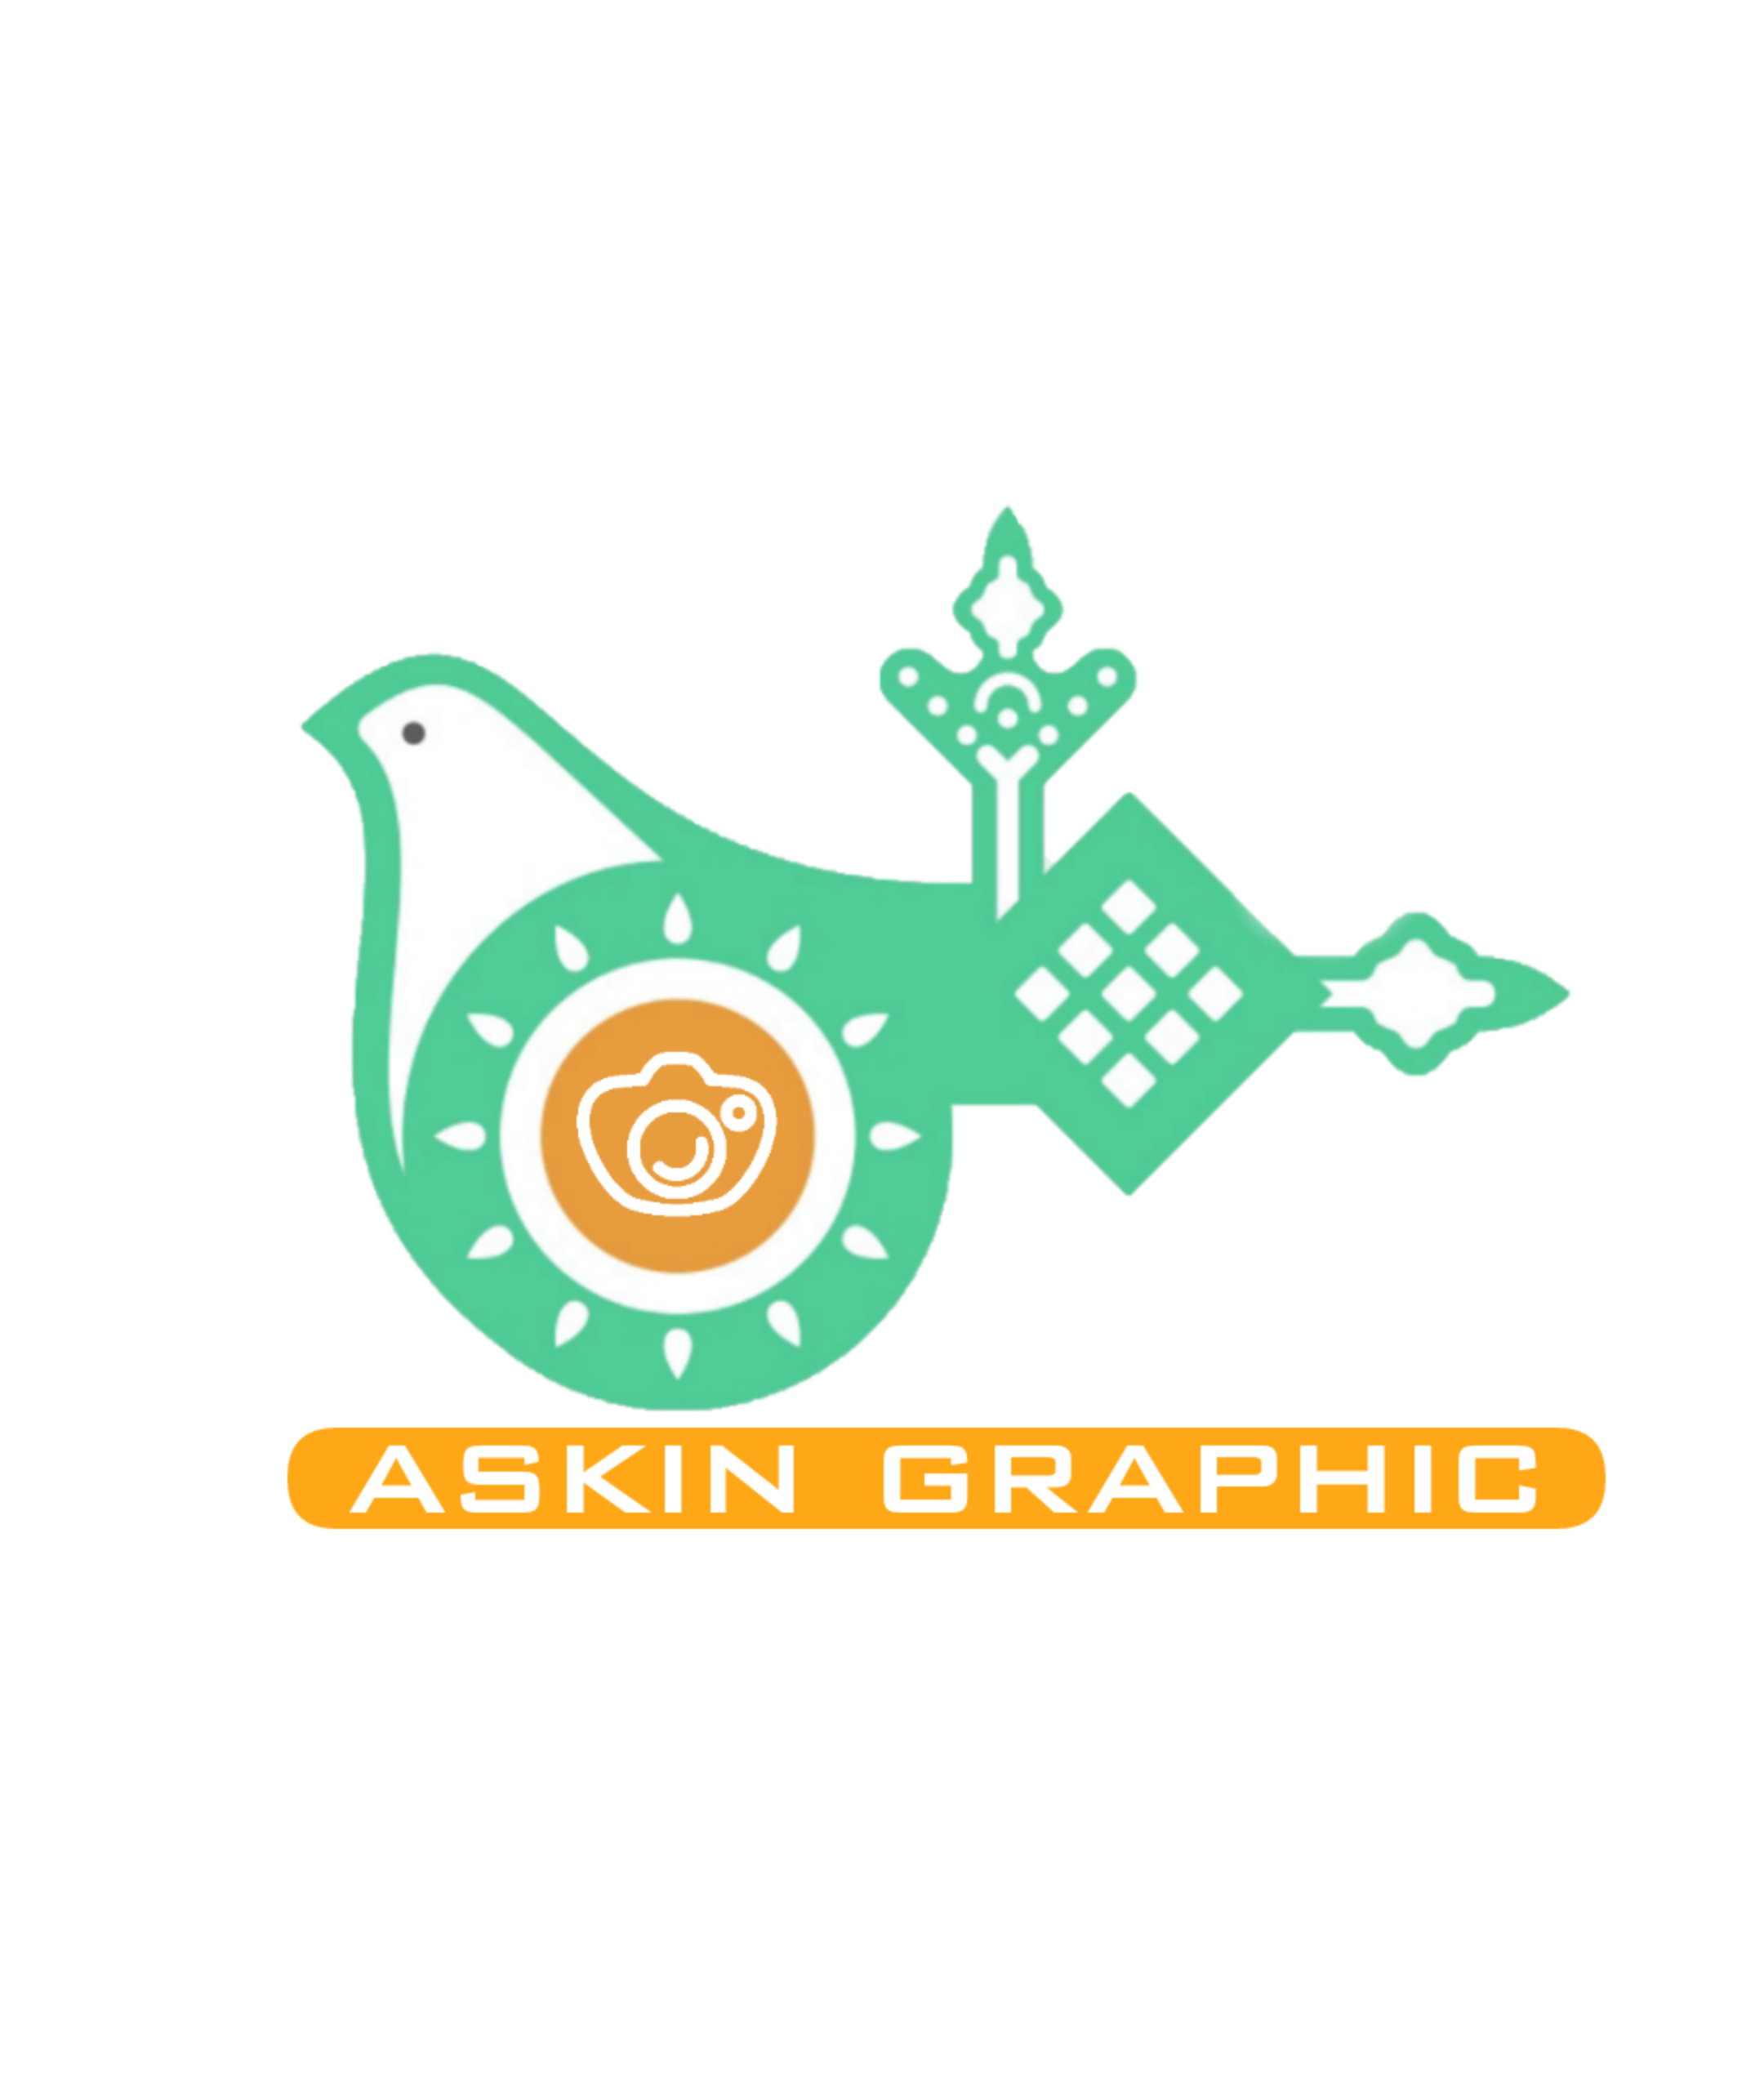 ASKIN GRAPHIC Co.